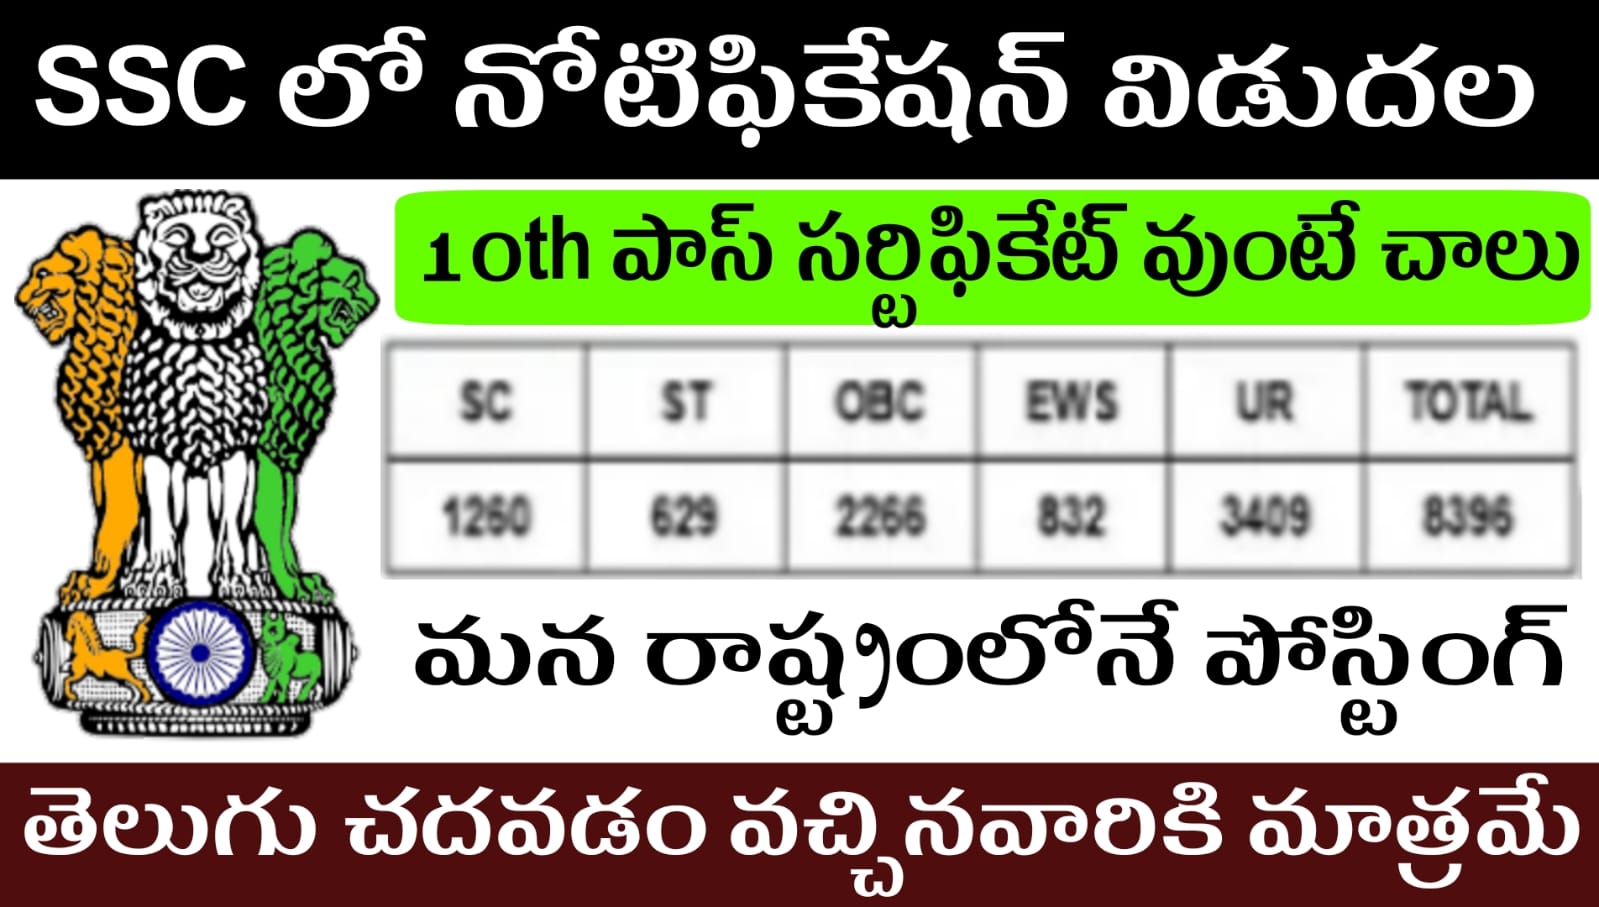 SSC Job Recruitment || Latest 8326 central jobs with tenth qualification Full Details